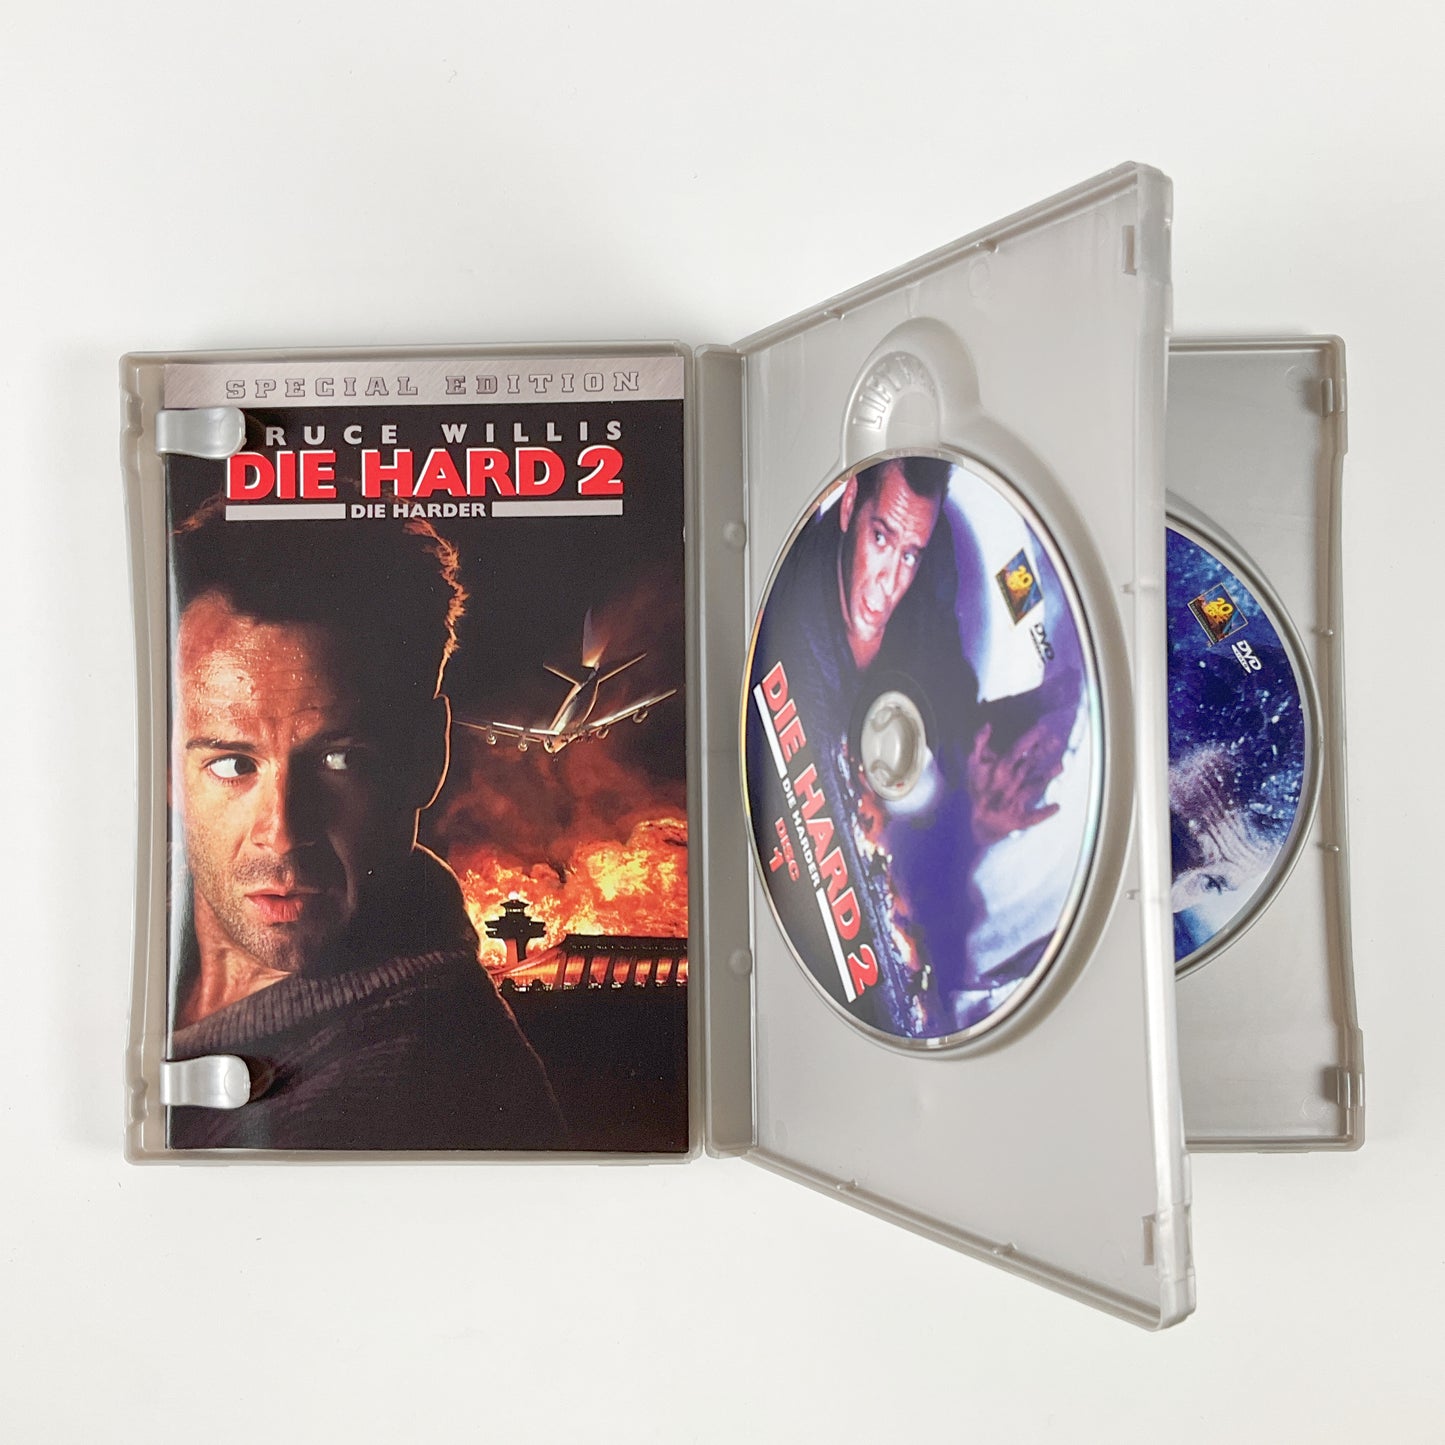 Die Hard: The Ultimate Collection DVD